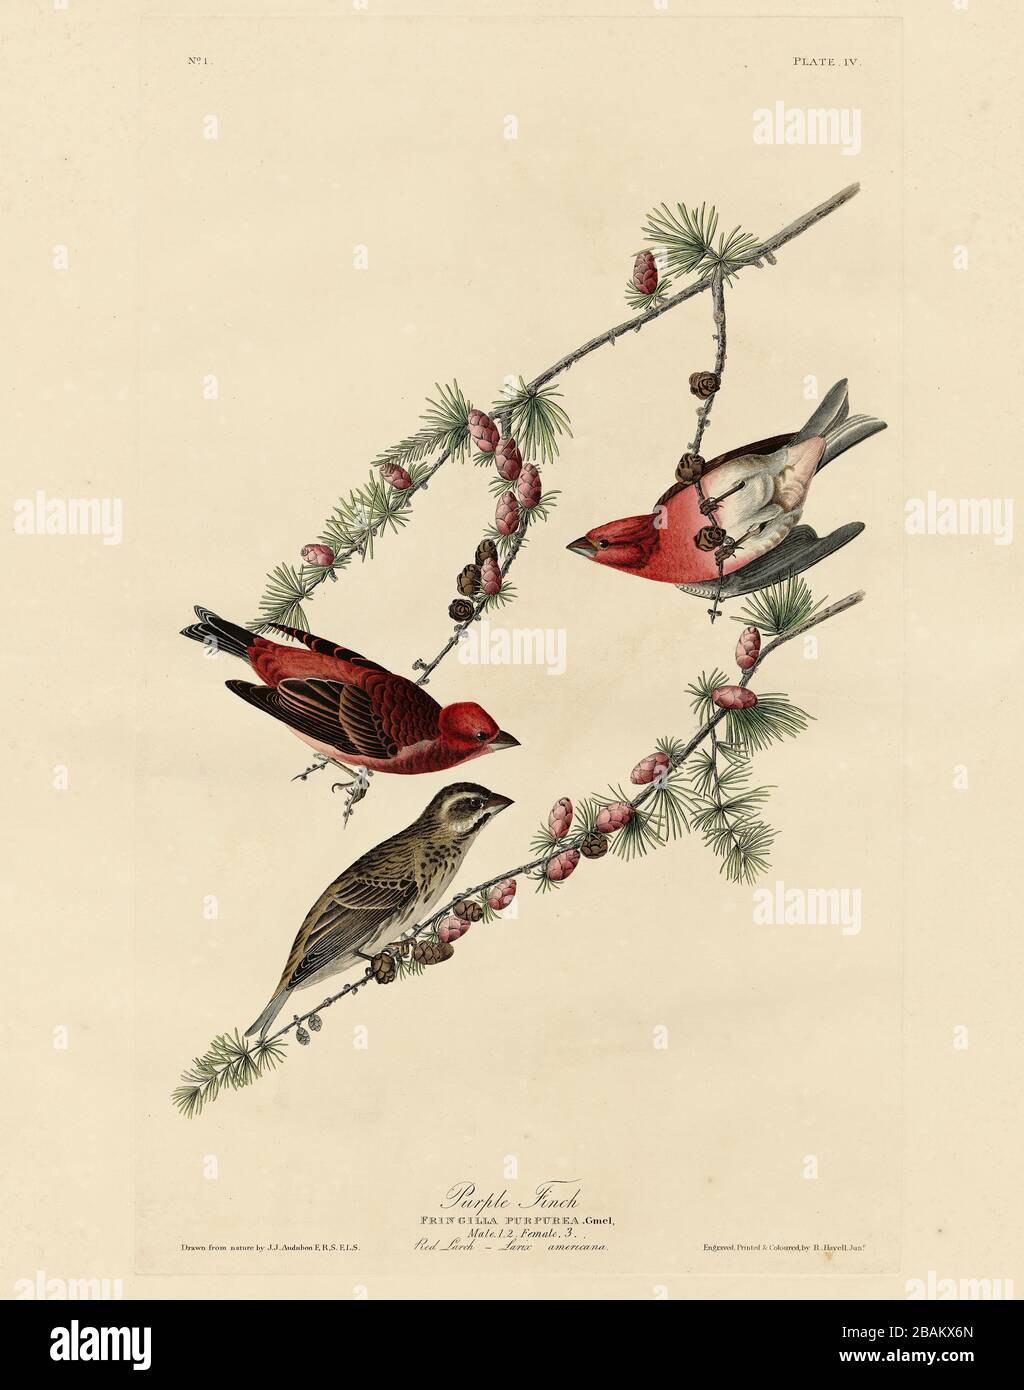 Plate 4 Purple Finch from The Birds of America folio (1827–1839) by John James Audubon, Very high resolution and quality edited image Stock Photo